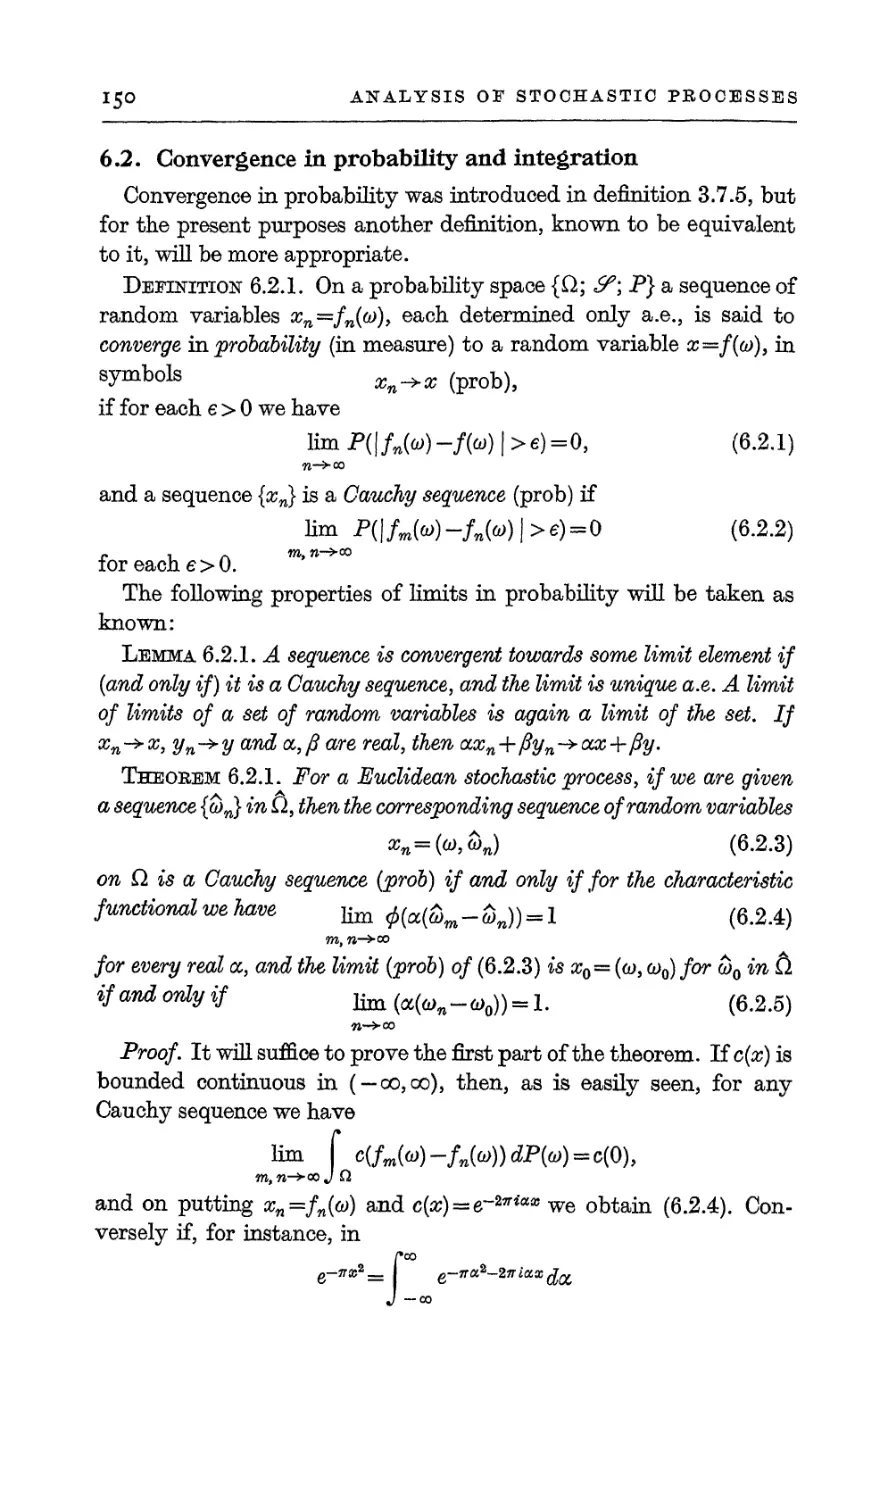 6.2. Convergence in probability and integration